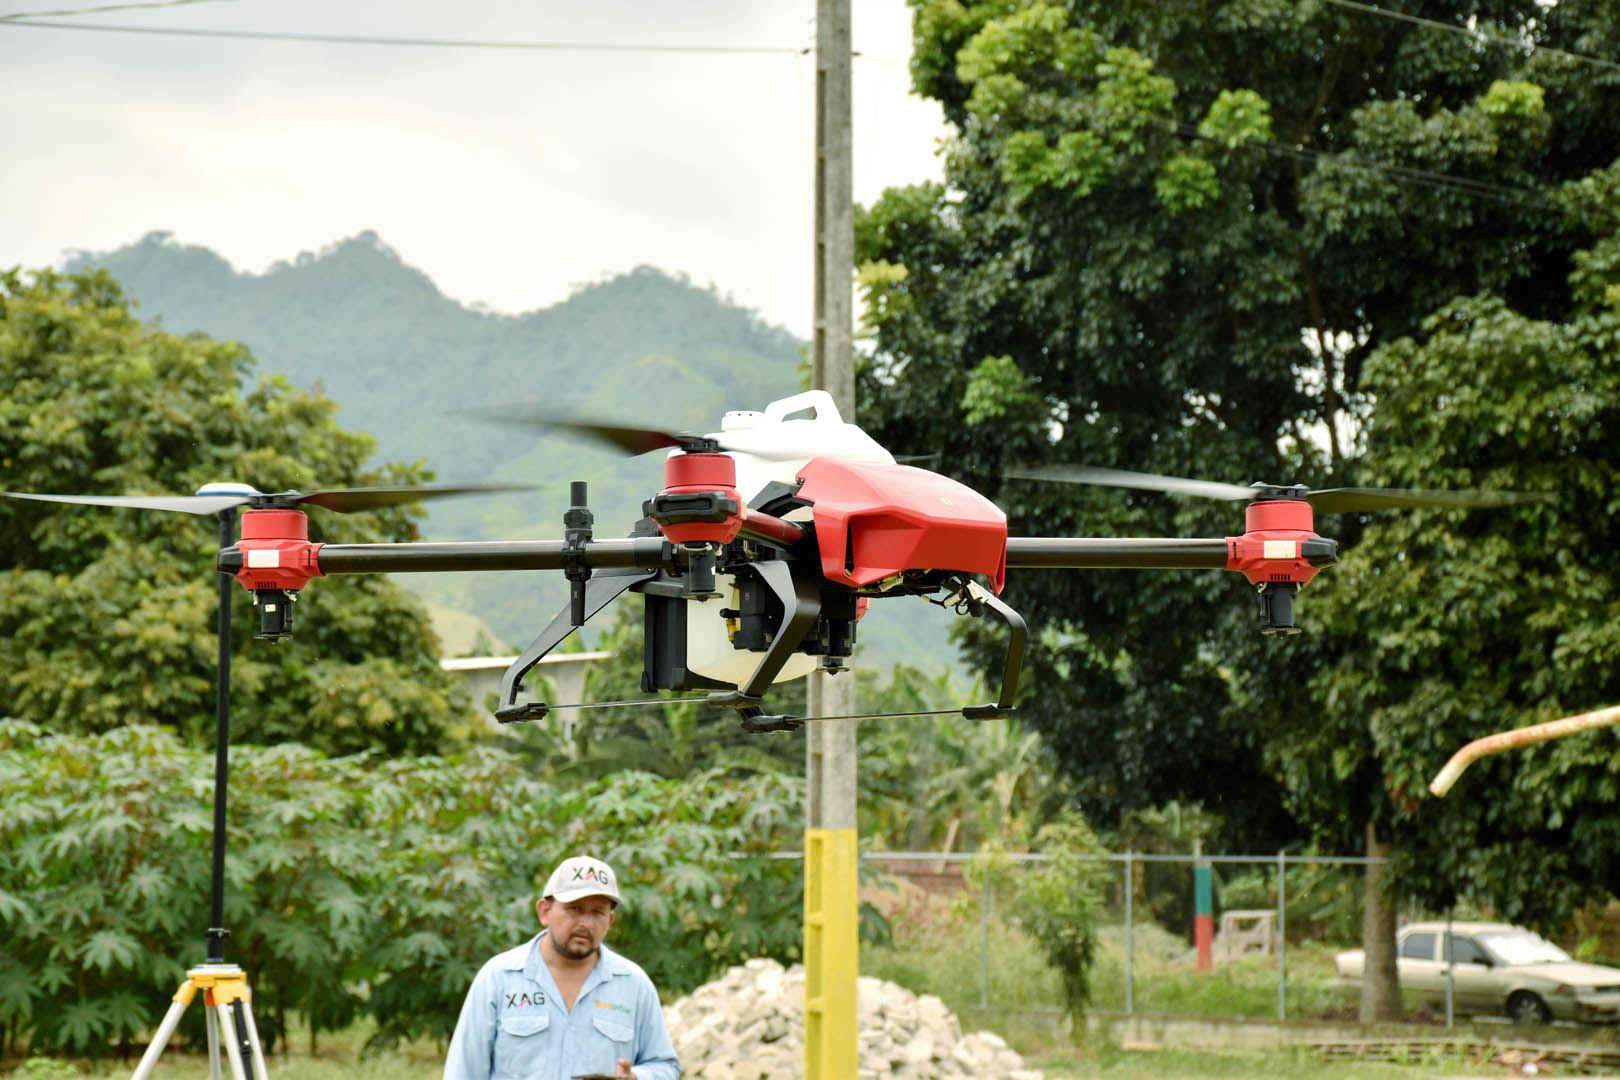 XAG drone demonstrating in the Technical University of Manabí (UTM), Ecuador